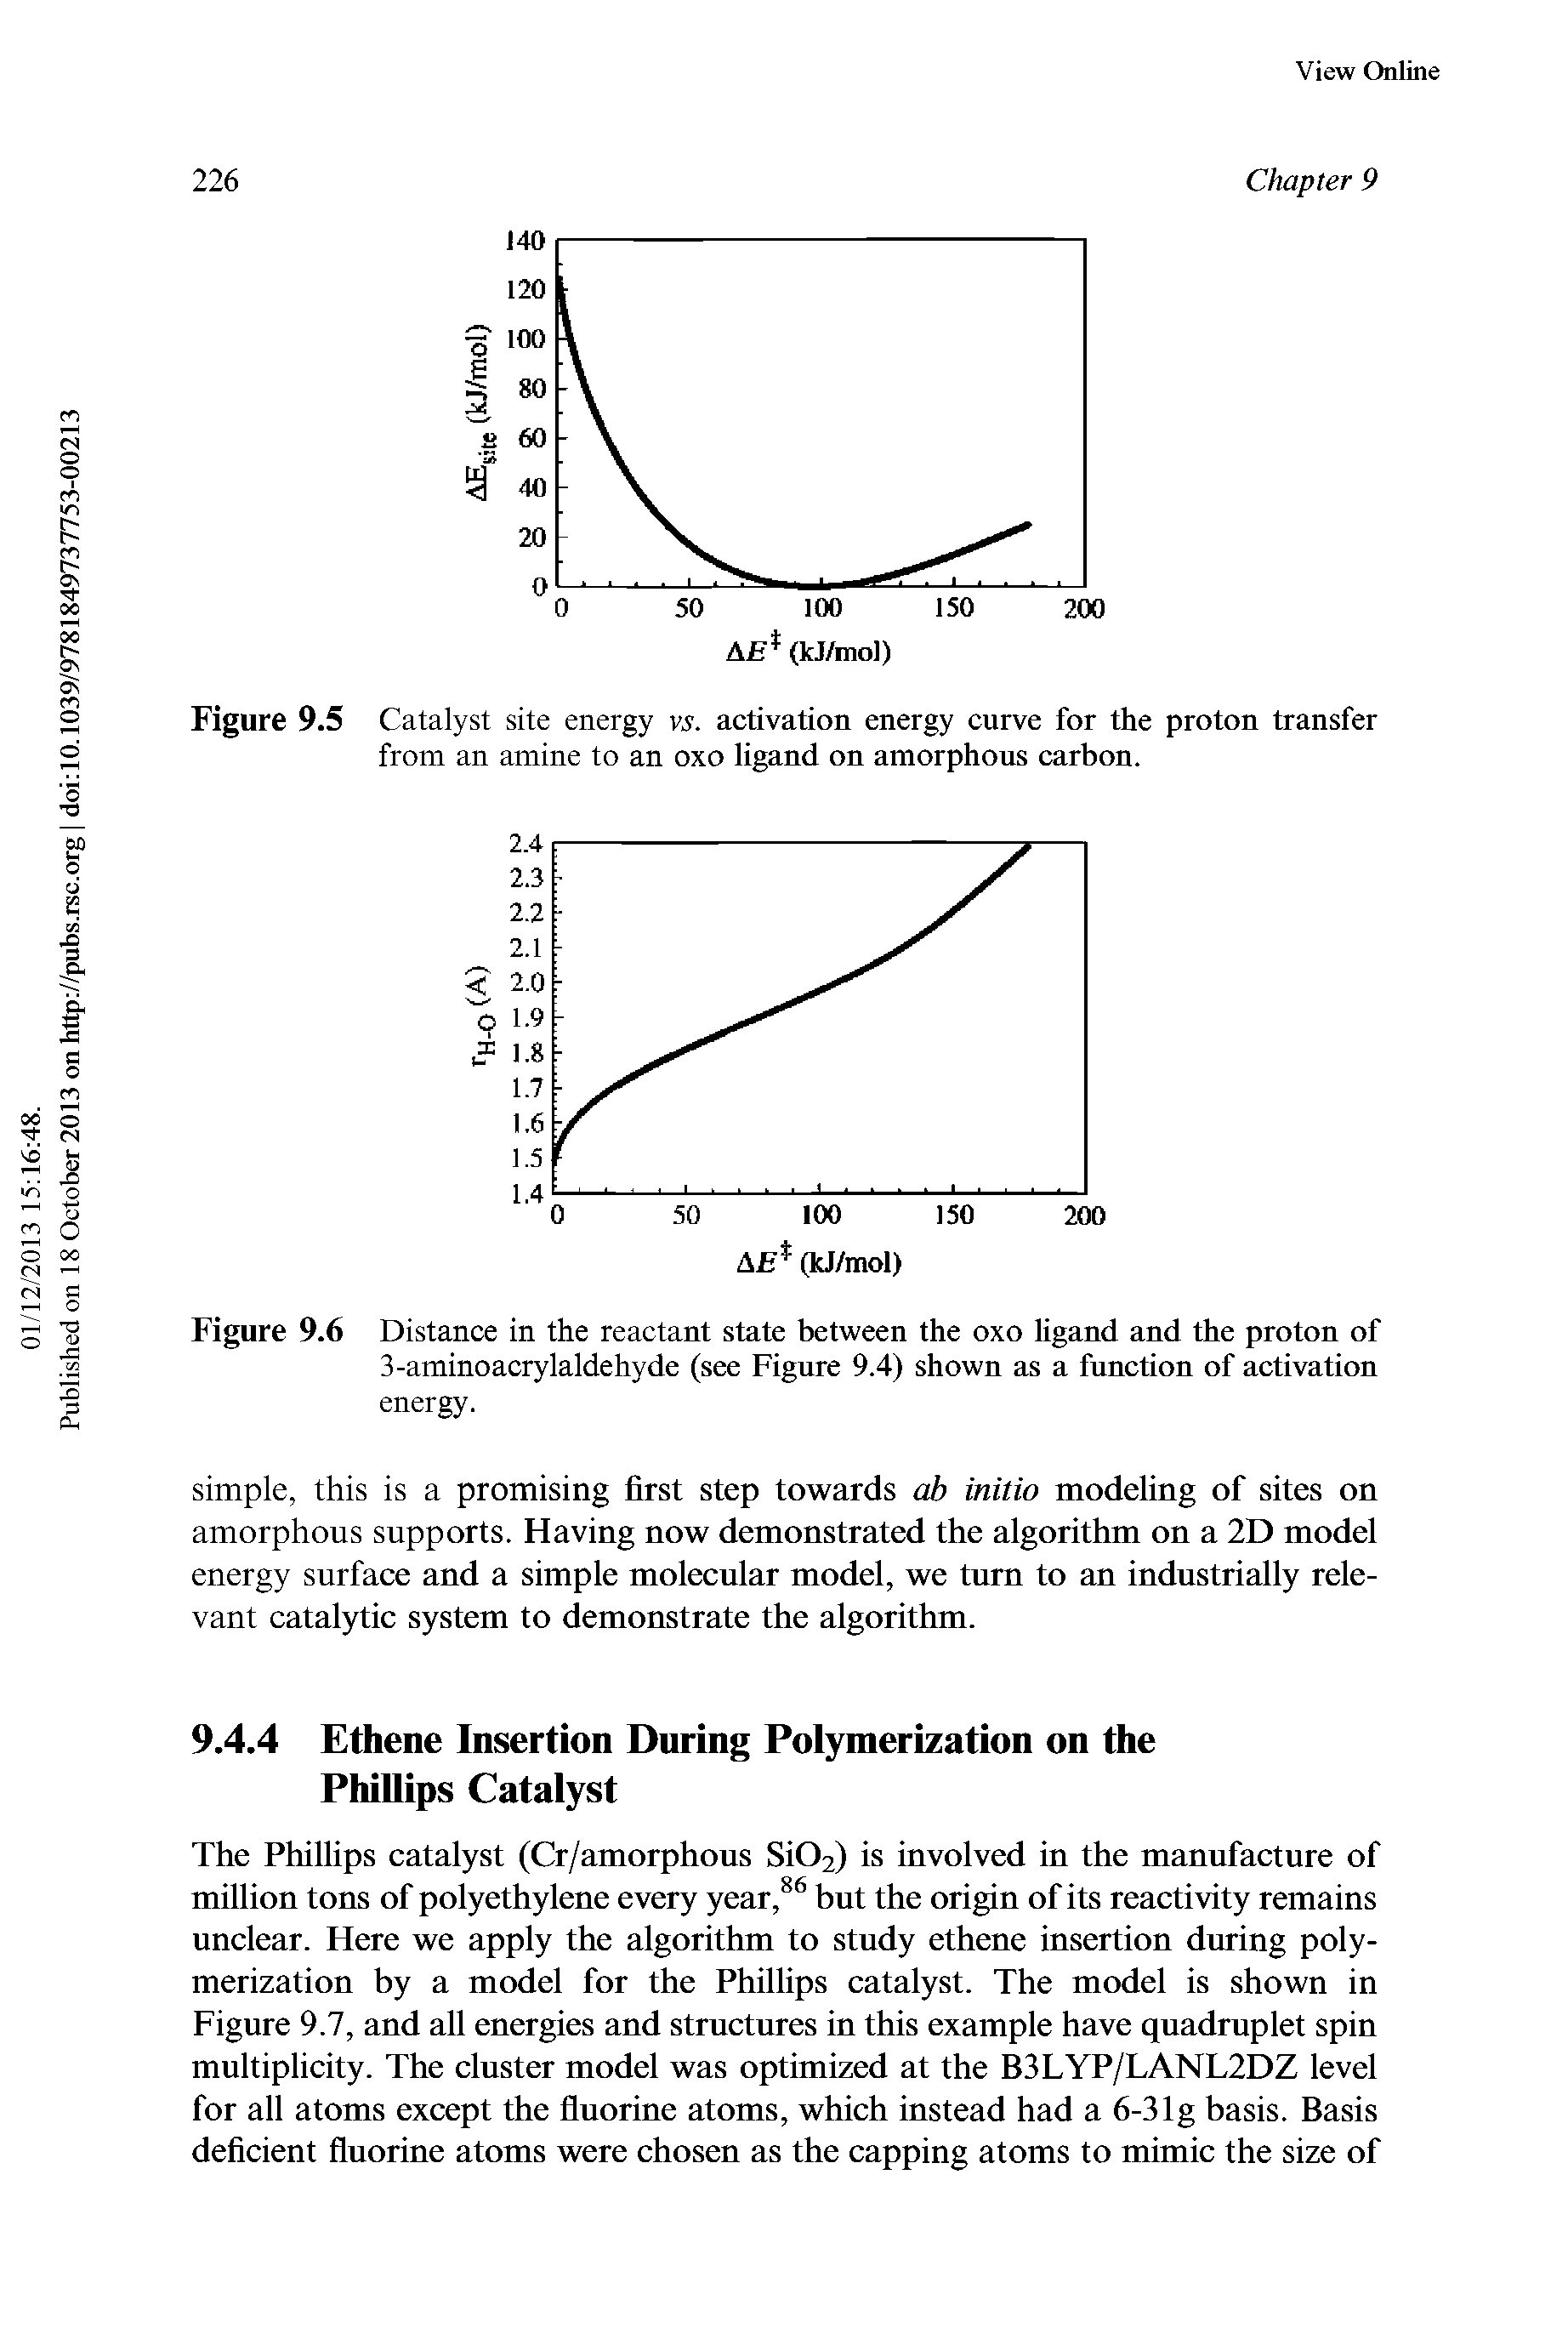 Figure 9.5 Catalyst site energy vs. activation energy curve for the proton transfer from an amine to an oxo ligand on amorphous carbon.